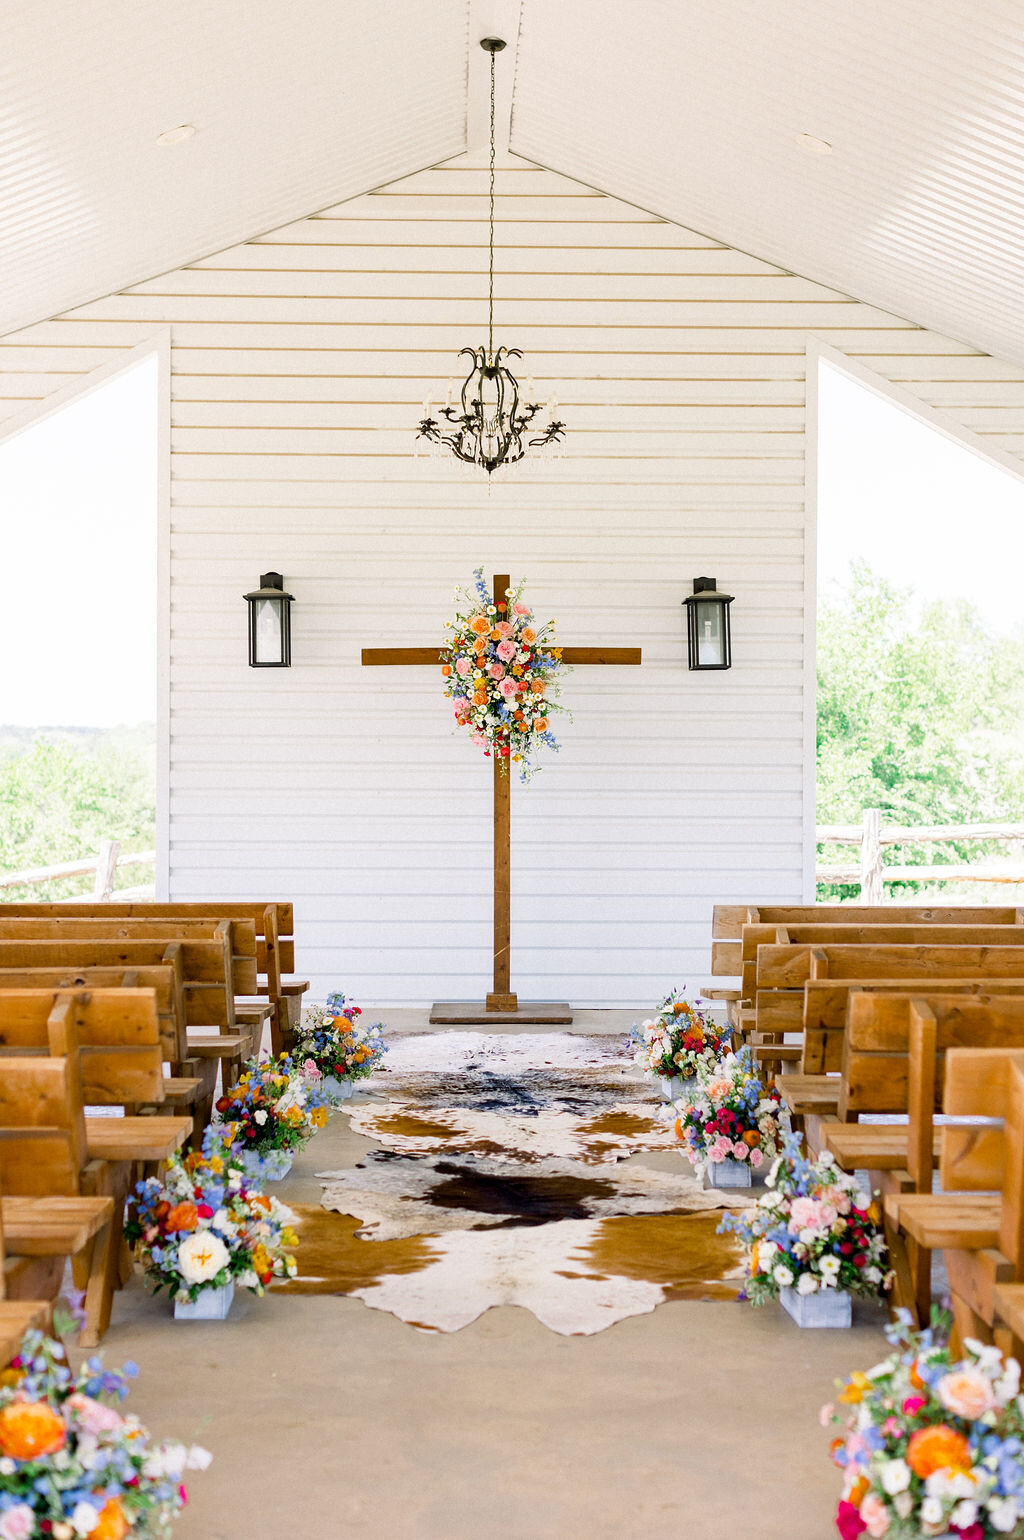 cowhide rug with bright flowers at ceremony alter